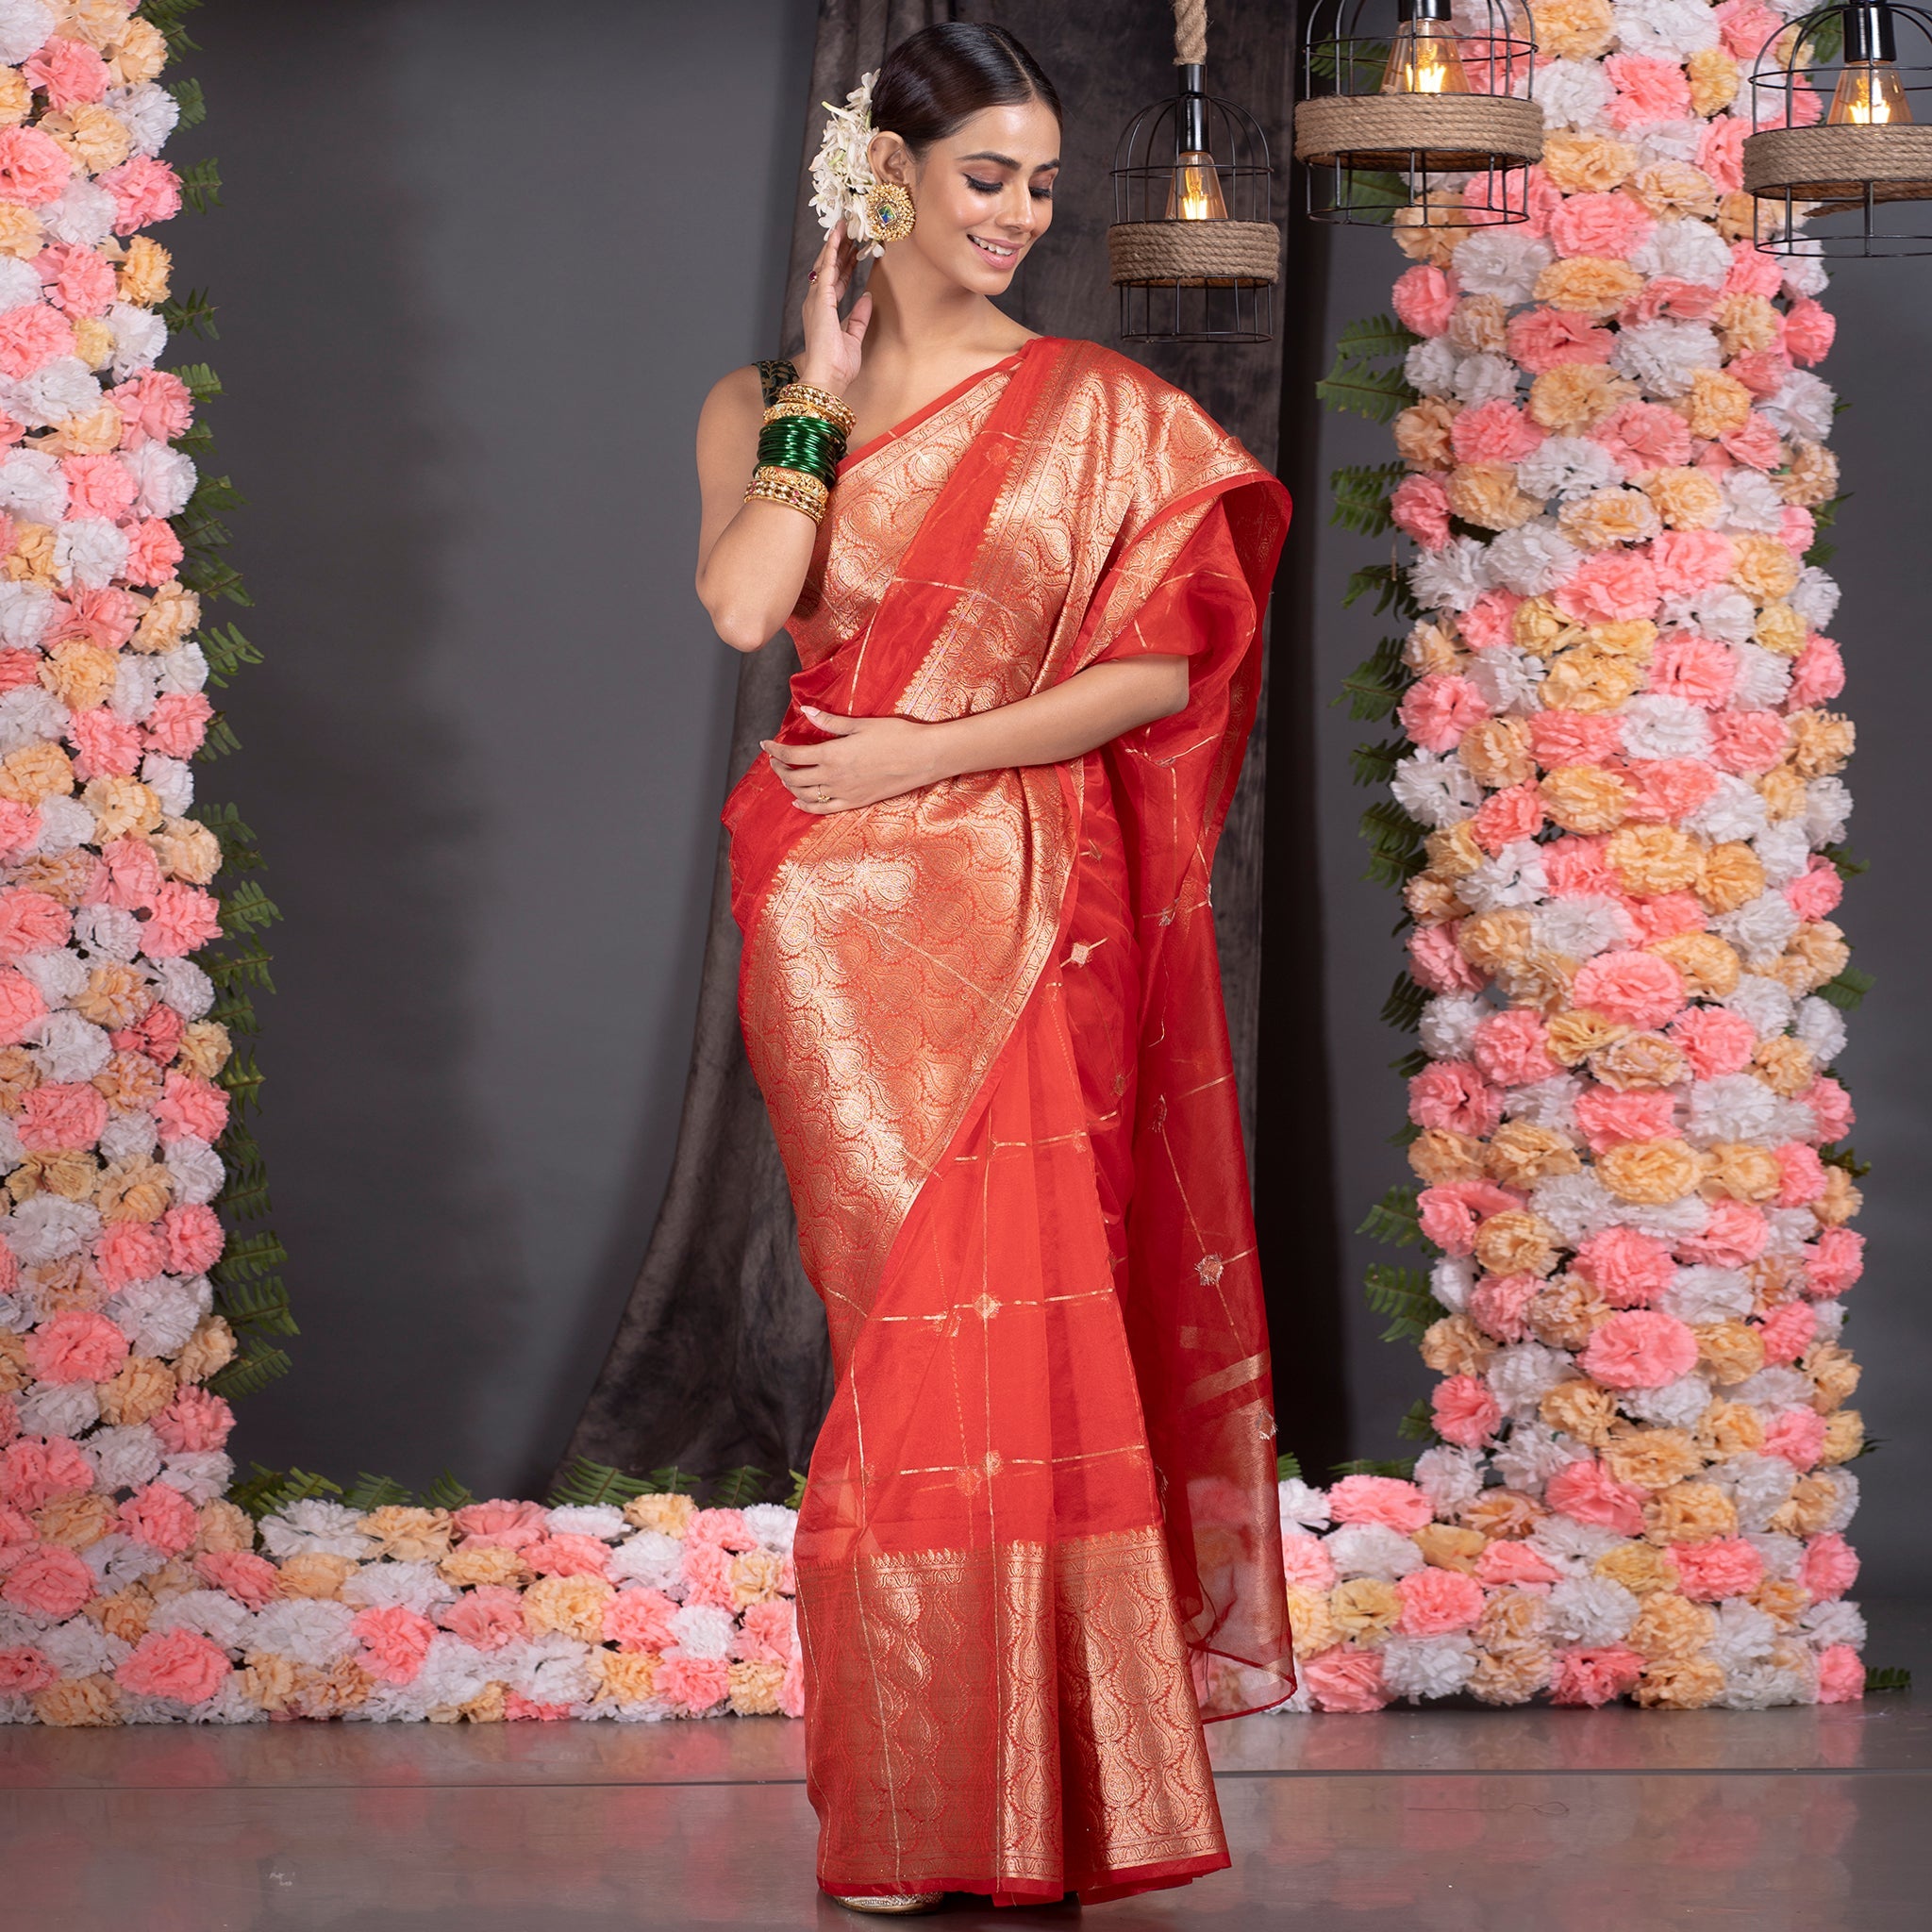 Women's Red Organza Saree With Square Motifs And Ambi Jaal Border - Boveee